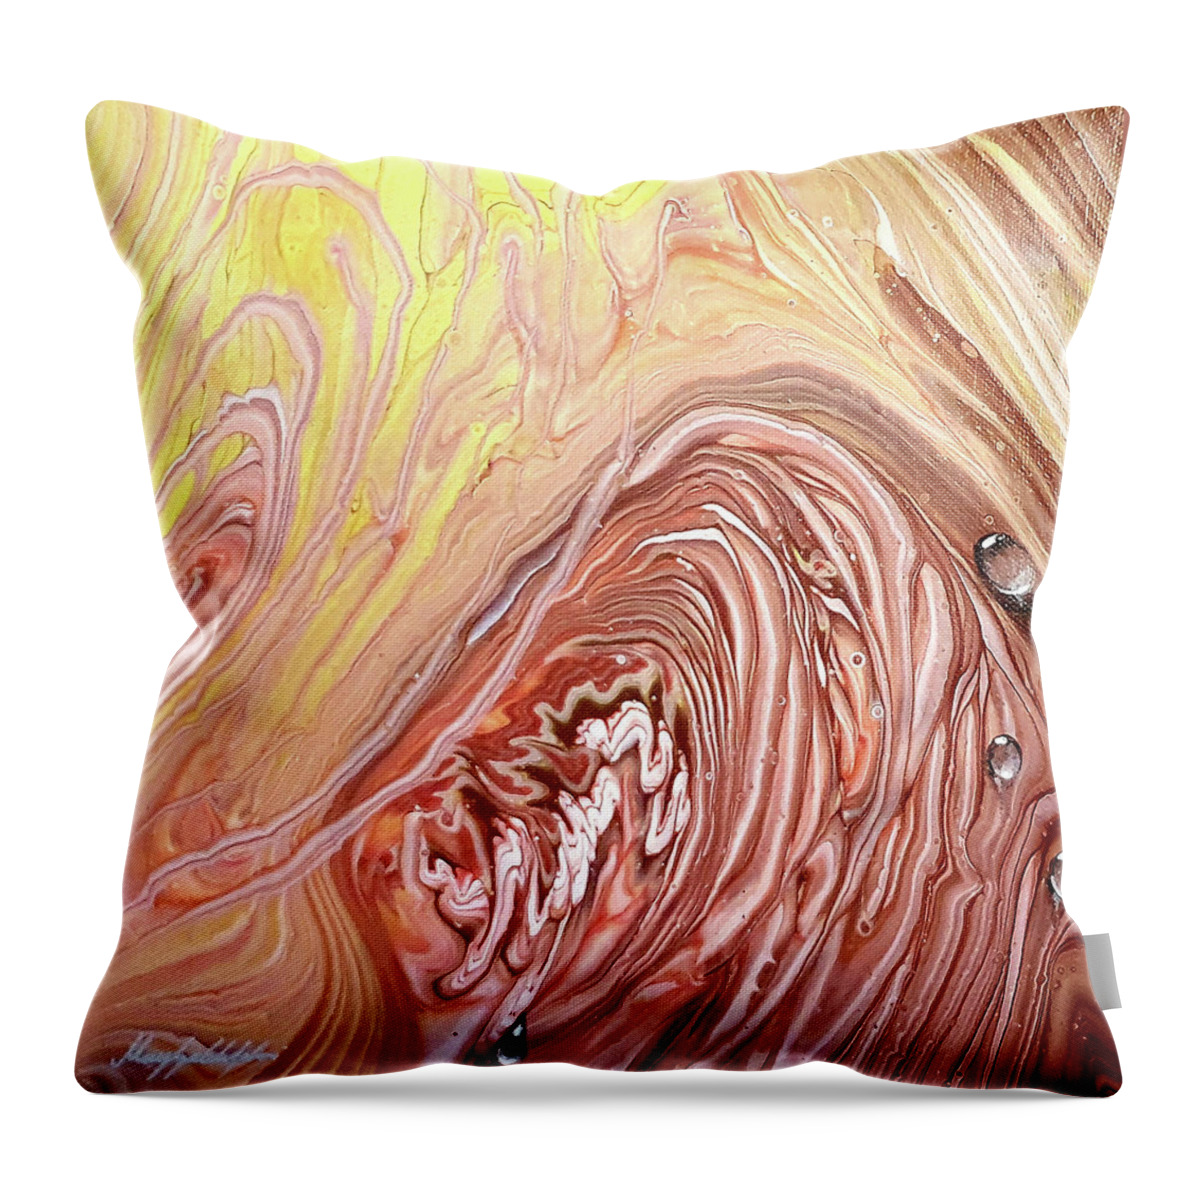 Drops Throw Pillow featuring the painting Drops On Flower by Themayart